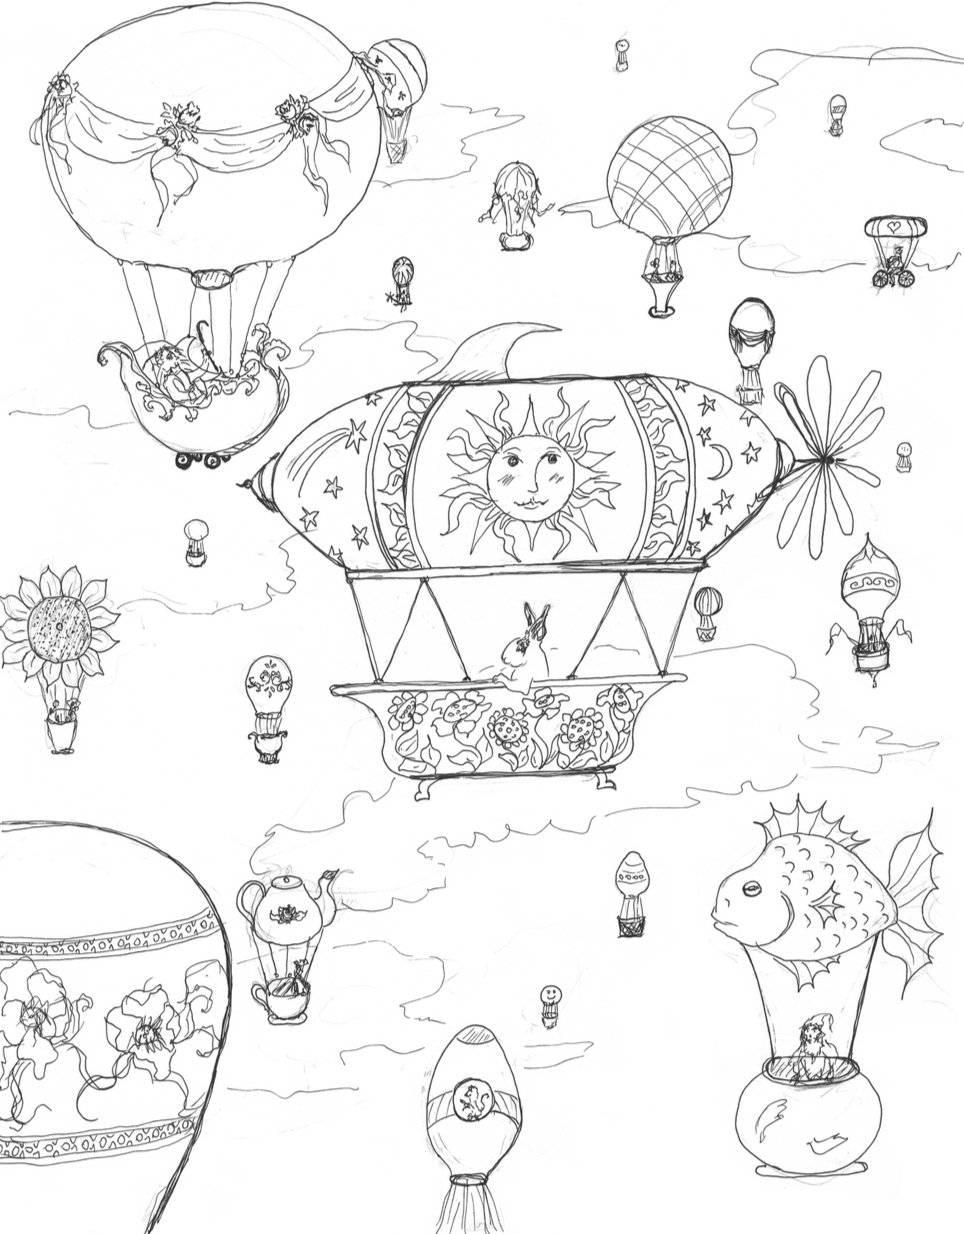 coloring-book-page-13.png